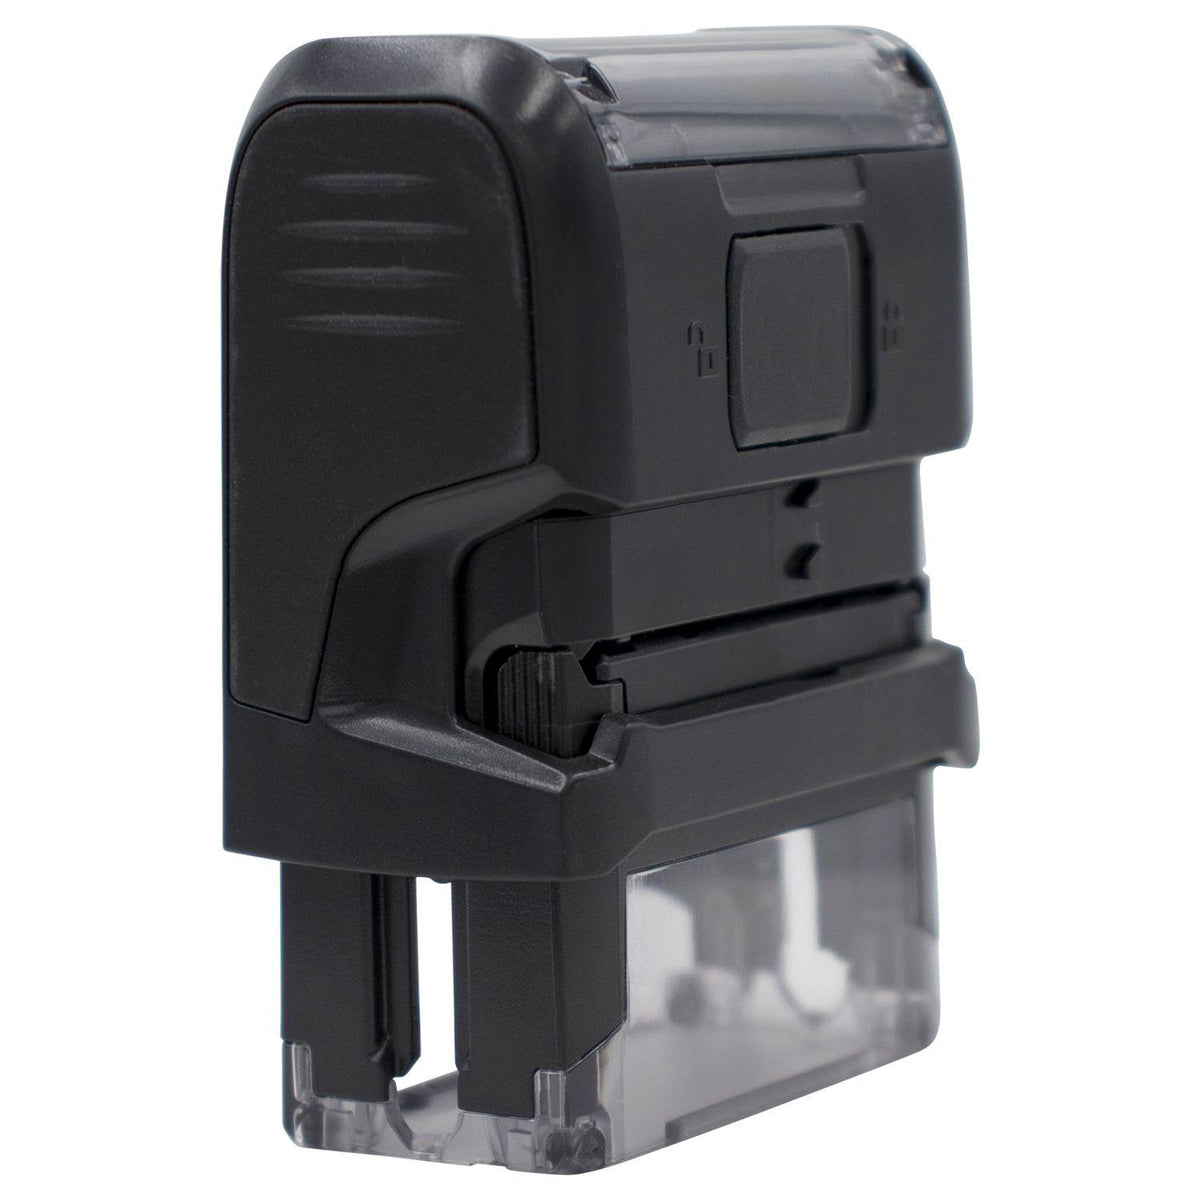 Self-Inking Confirmation of Phone Order Stamp - Engineer Seal Stamps - Brand_Trodat, Impression Size_Small, Stamp Type_Self-Inking Stamp, Type of Use_Office, Type of Use_Postal &amp; Mailing